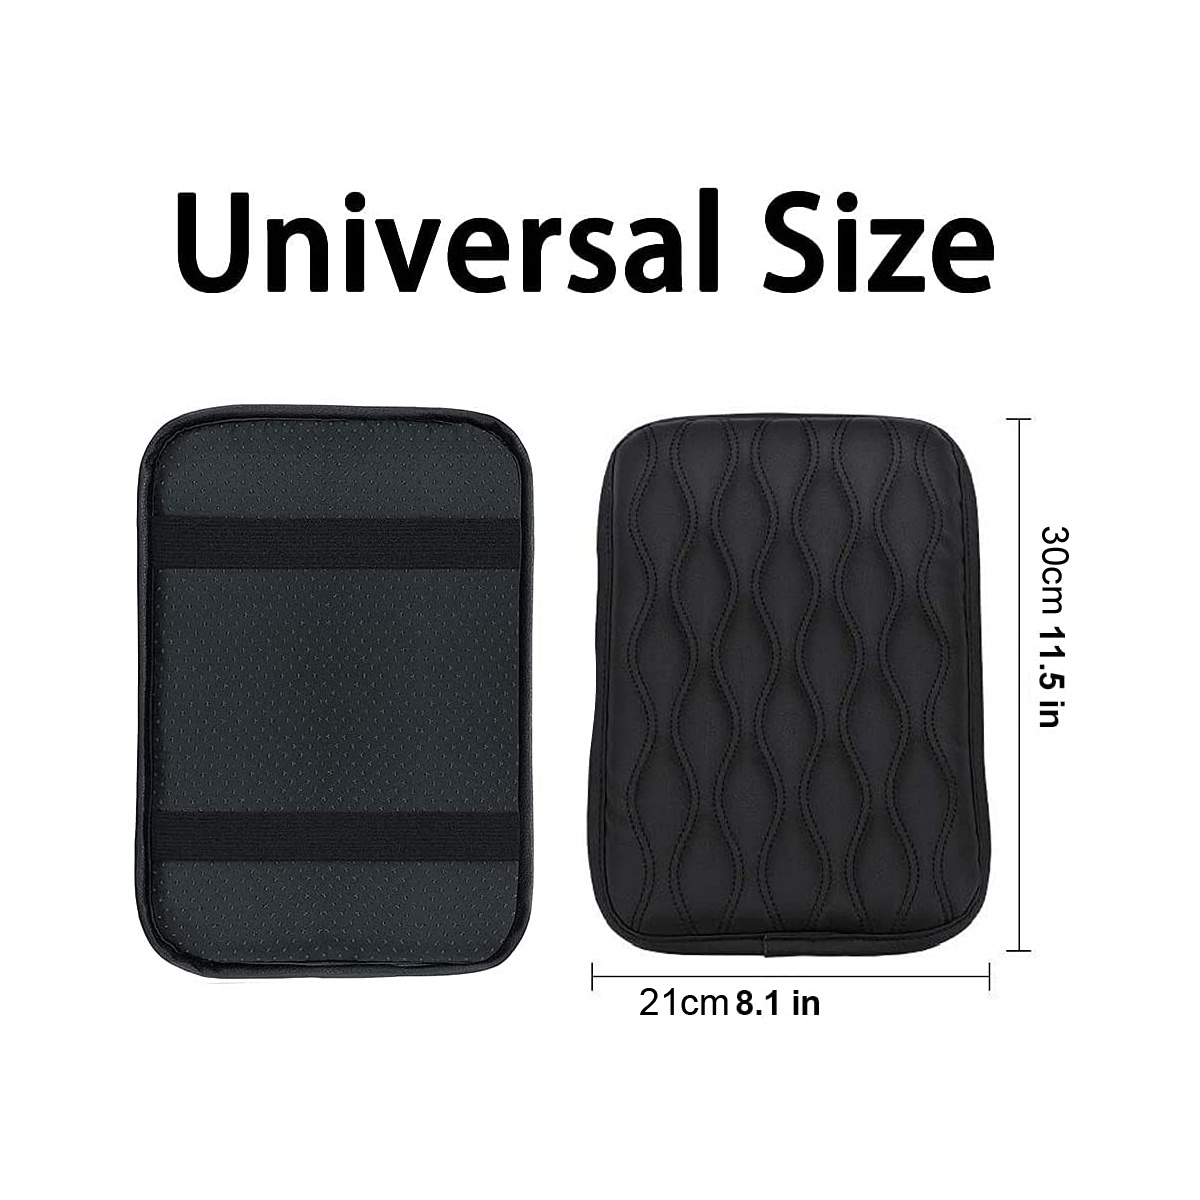 OBOSOE Universal Center Console Cover for Most Vehicle, SUV, Truck, Car,  Waterproof Armrest Cover Center Console Pad, Car Armrest Seat Box Cover  Protector(Black) 